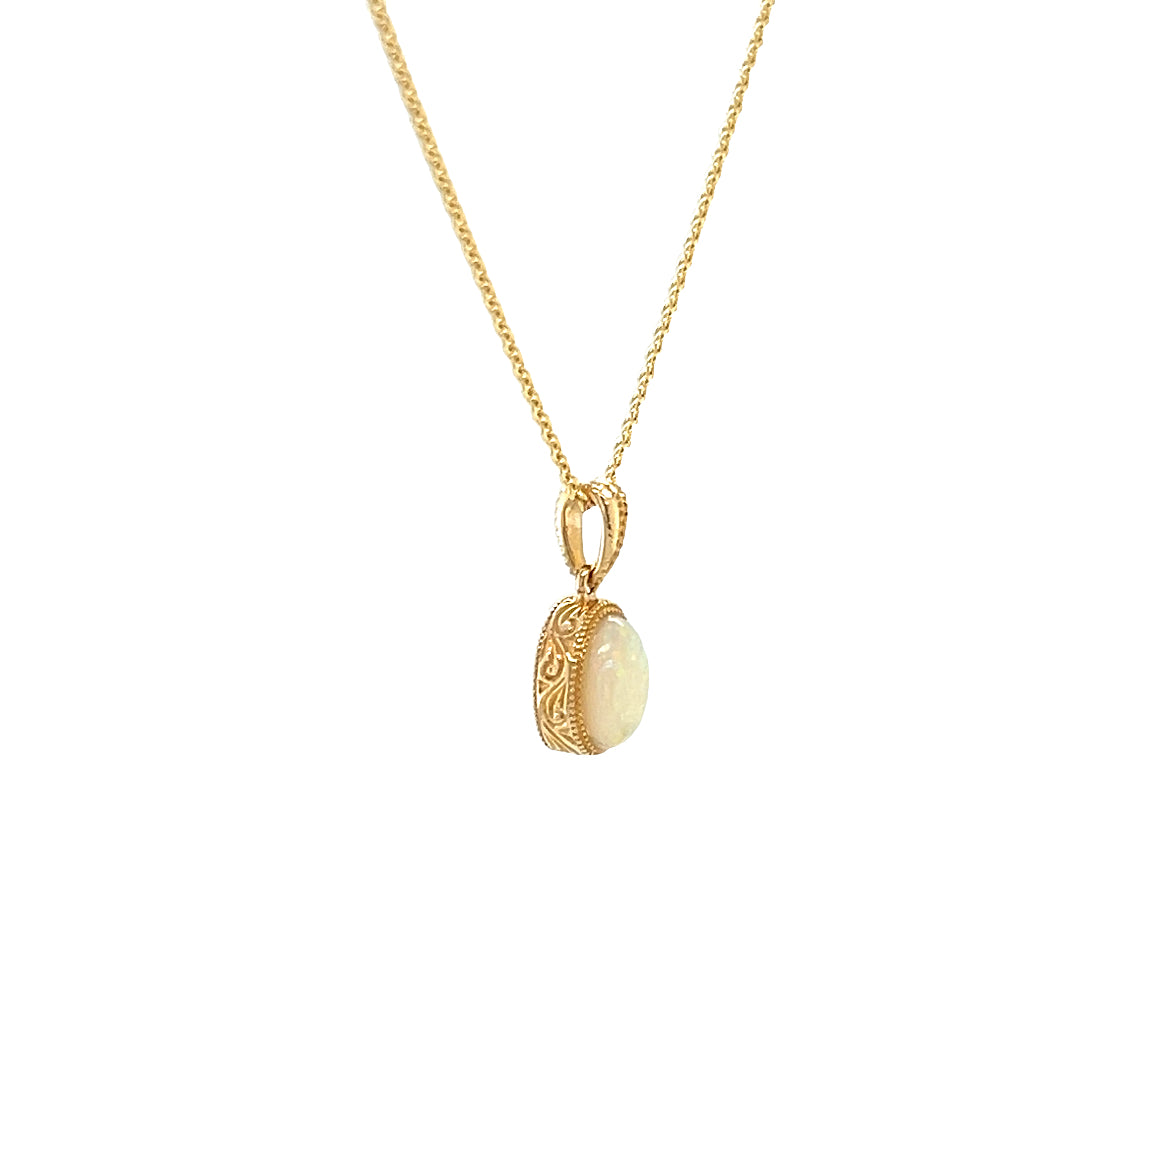 White Opal Pendant with Engraving and Milgrain Details in 14K Yellow Gold Left Profile View